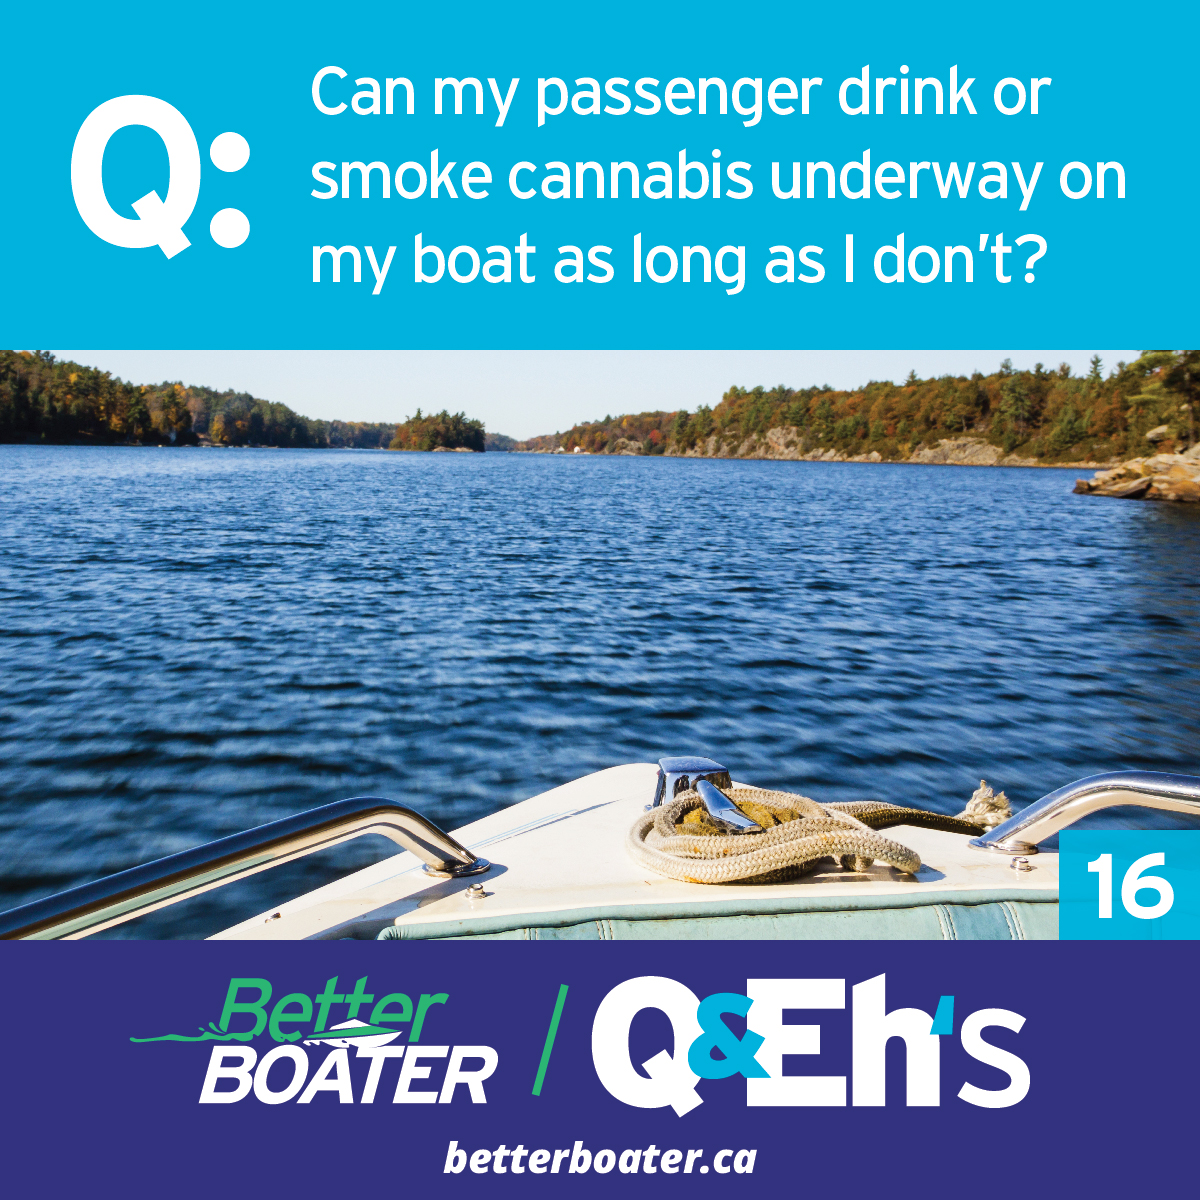 https://betterboater.ca/Alcohol%20Underway